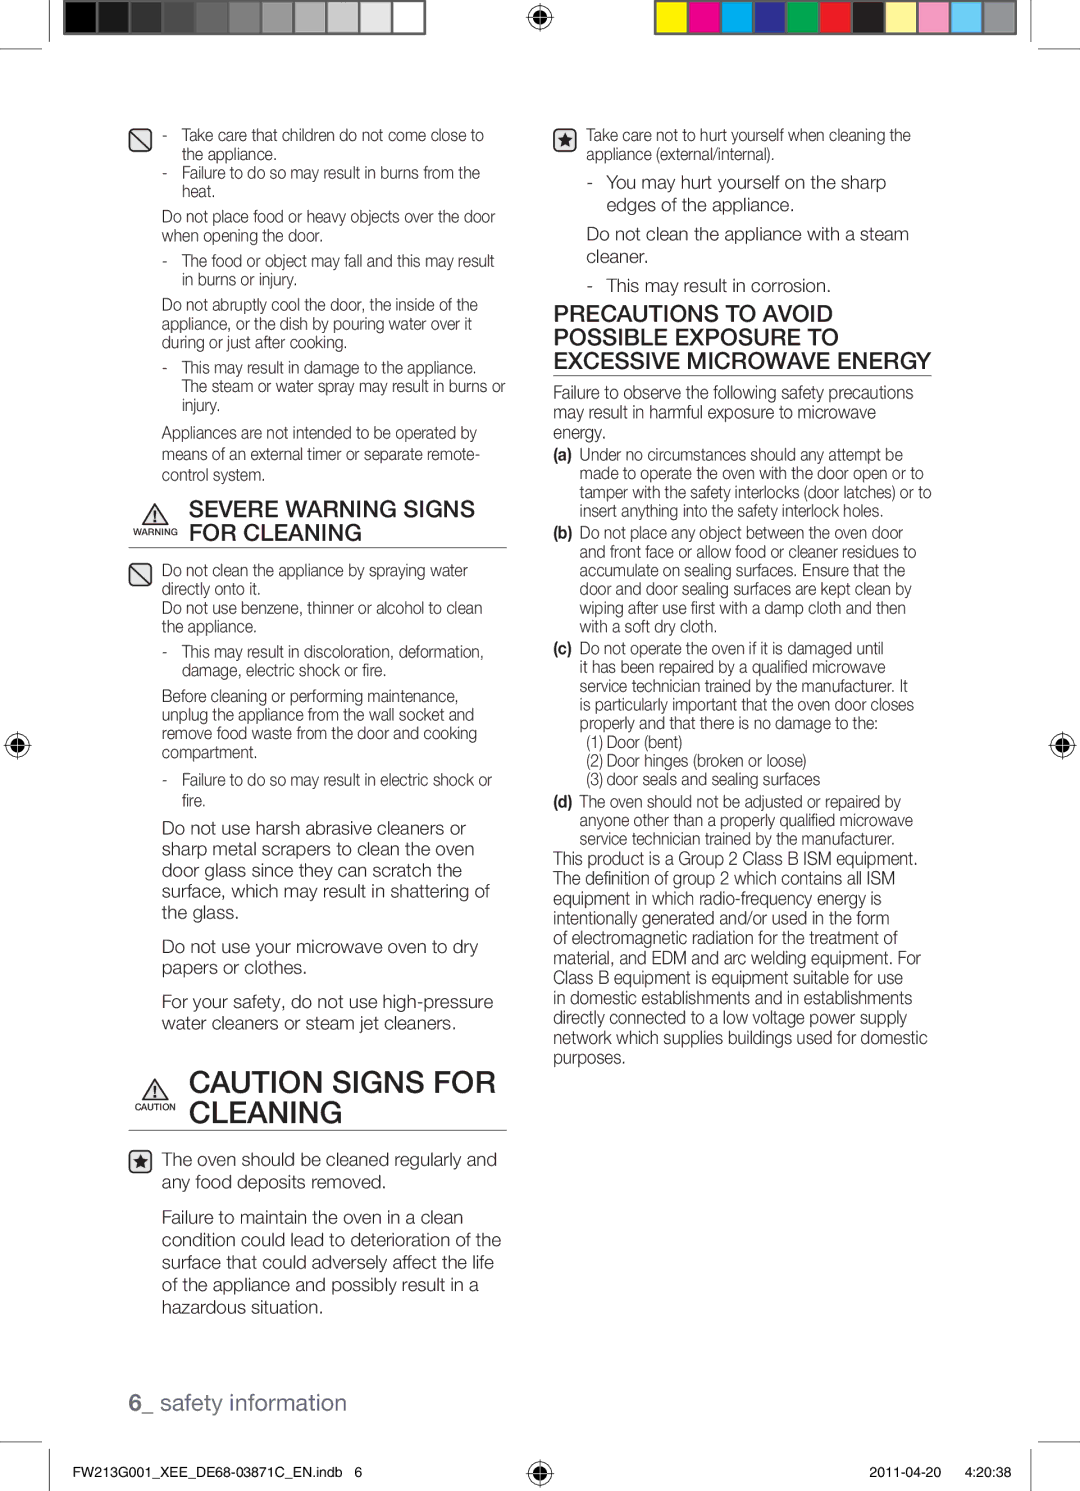 Samsung FW213G001/XEE manual Severe Warning Signs Warning for Cleaning 